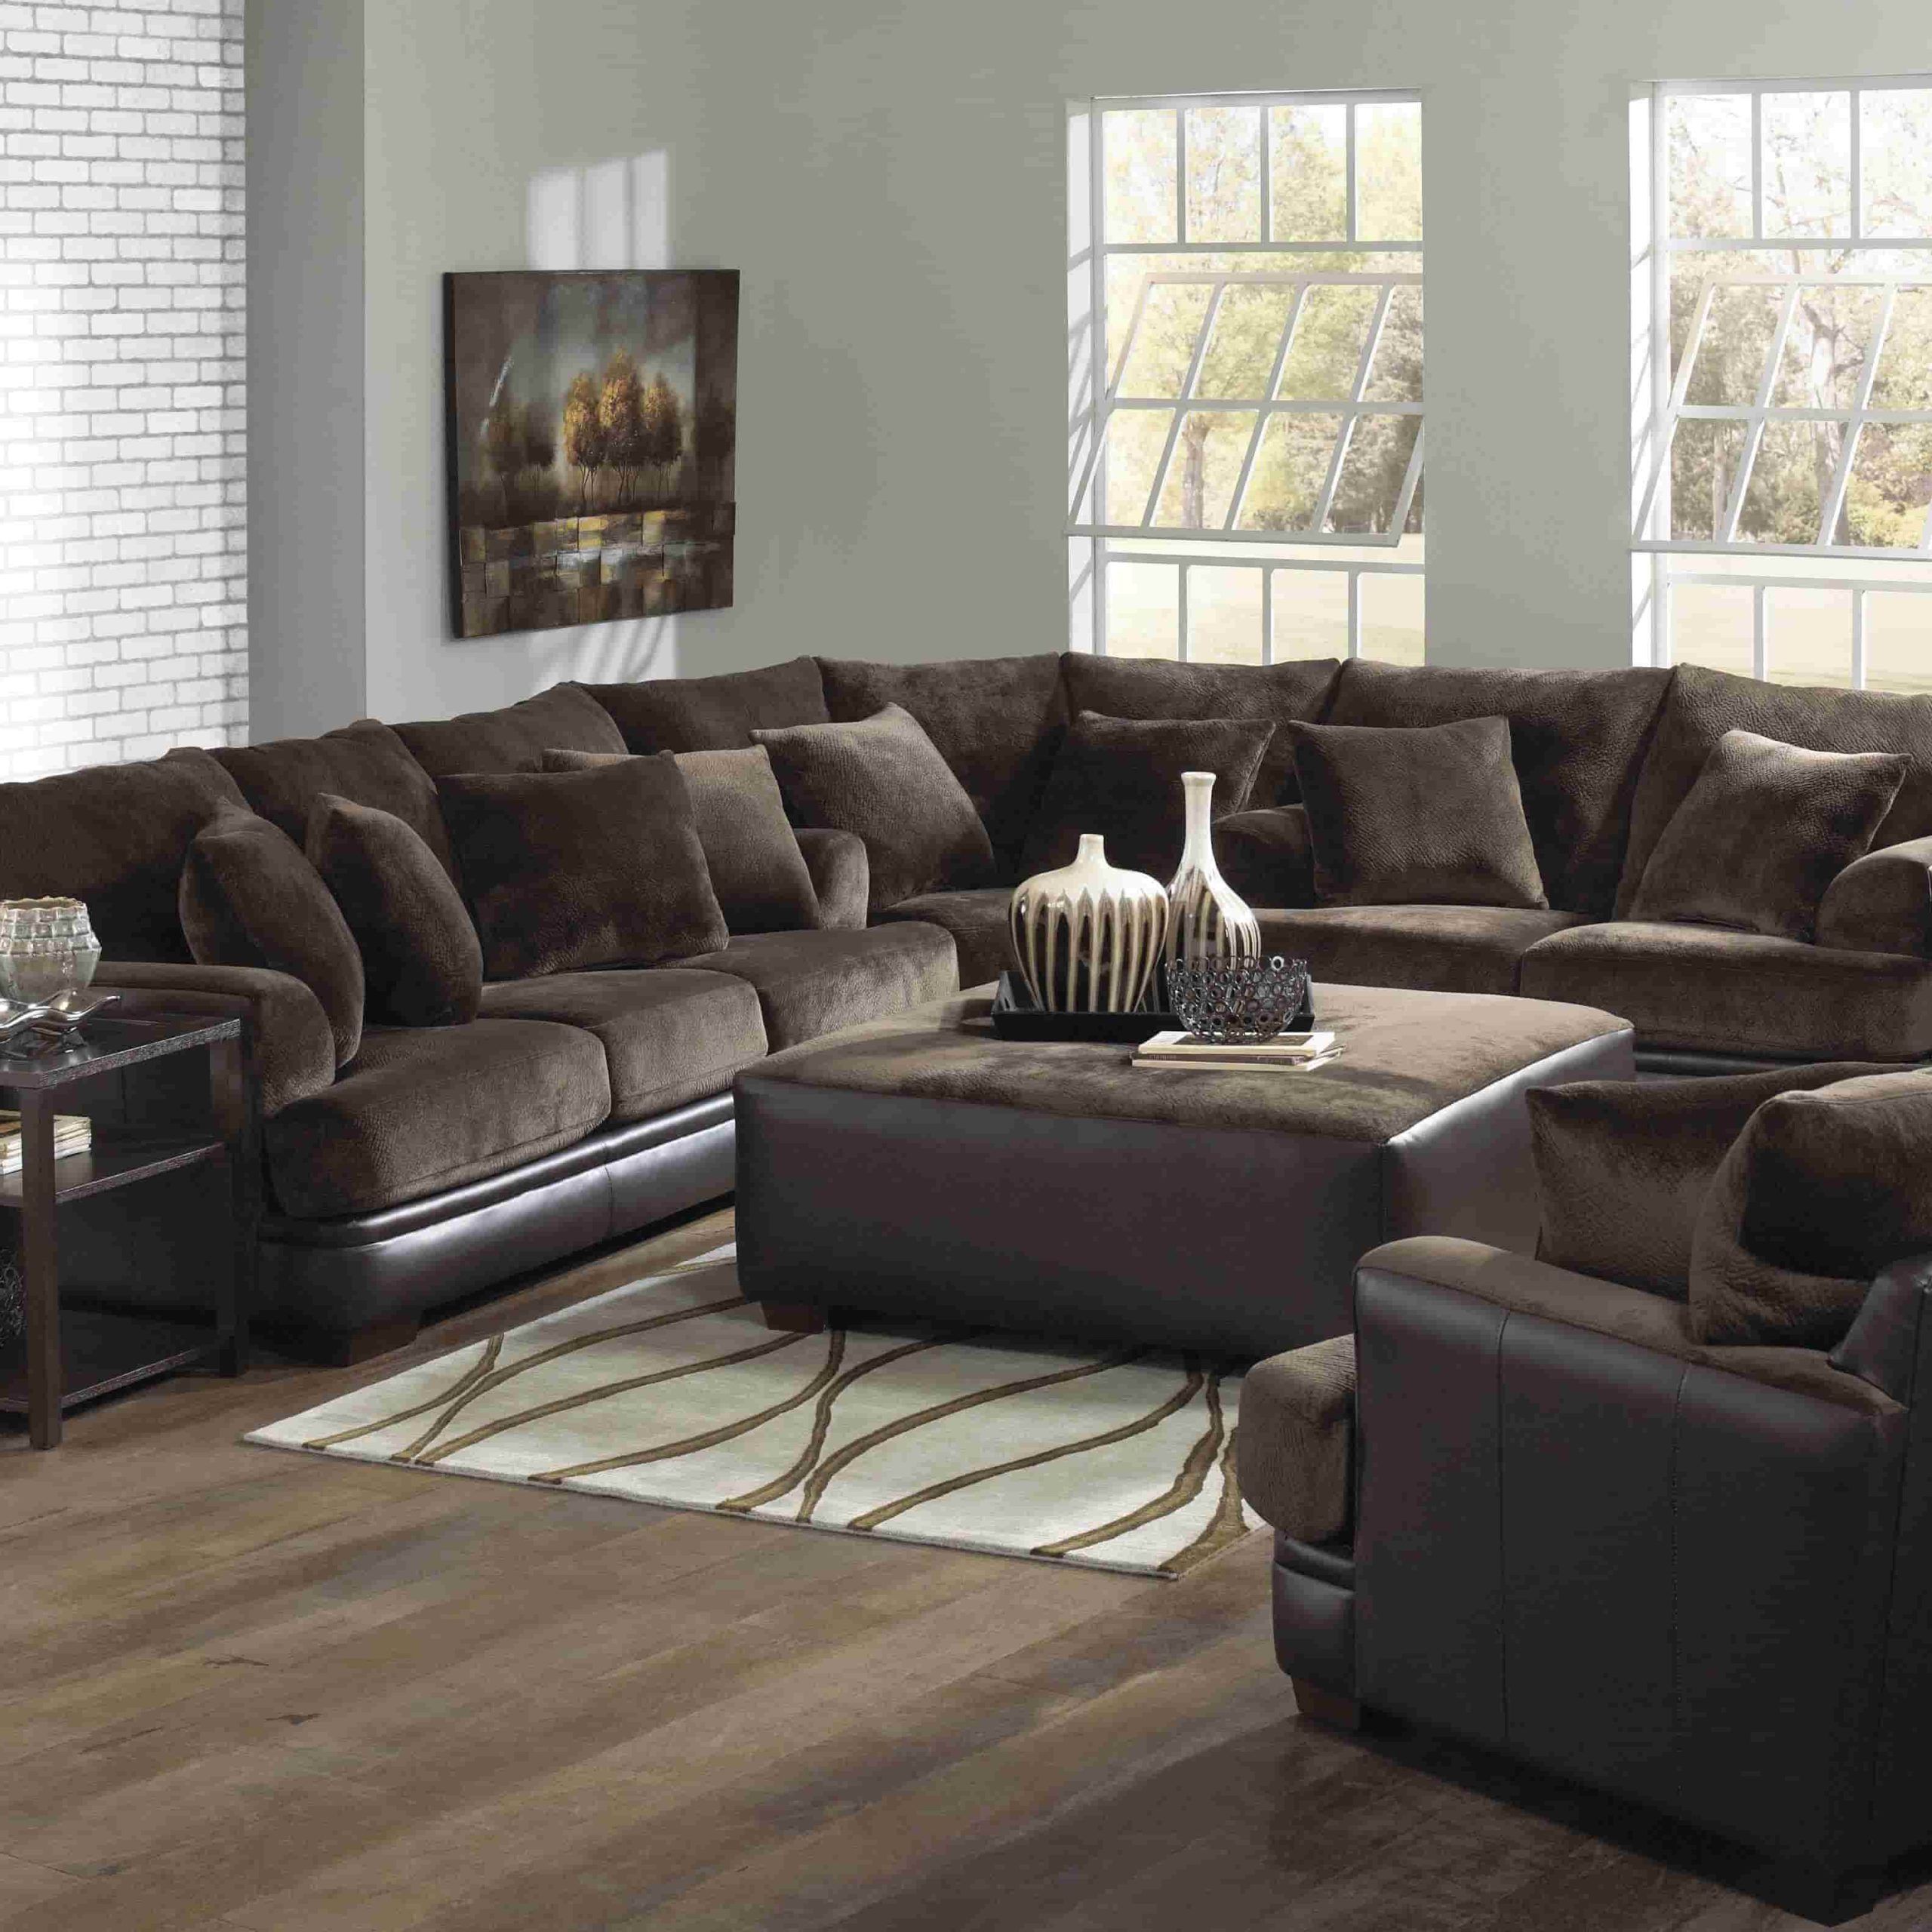 Living Room Decor With Dark Brown Couch – Inspiring Ideas Throughout Sofas In Chocolate Brown (Gallery 16 of 20)